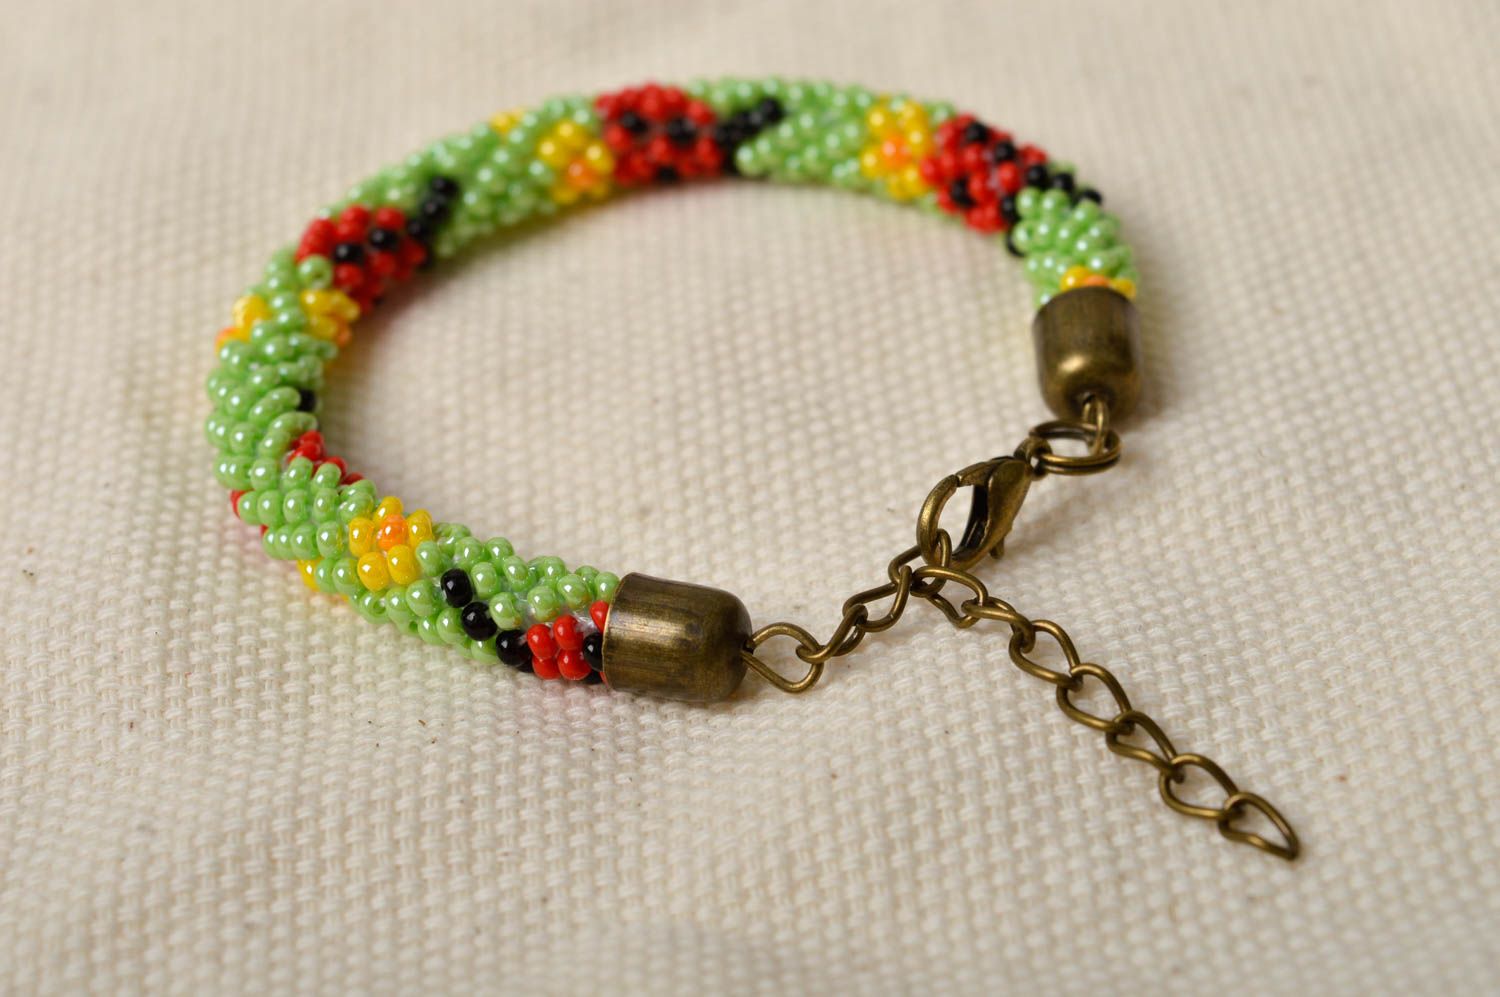 Handmade beaded cord adjustable bracelet in light green, red and black color photo 1